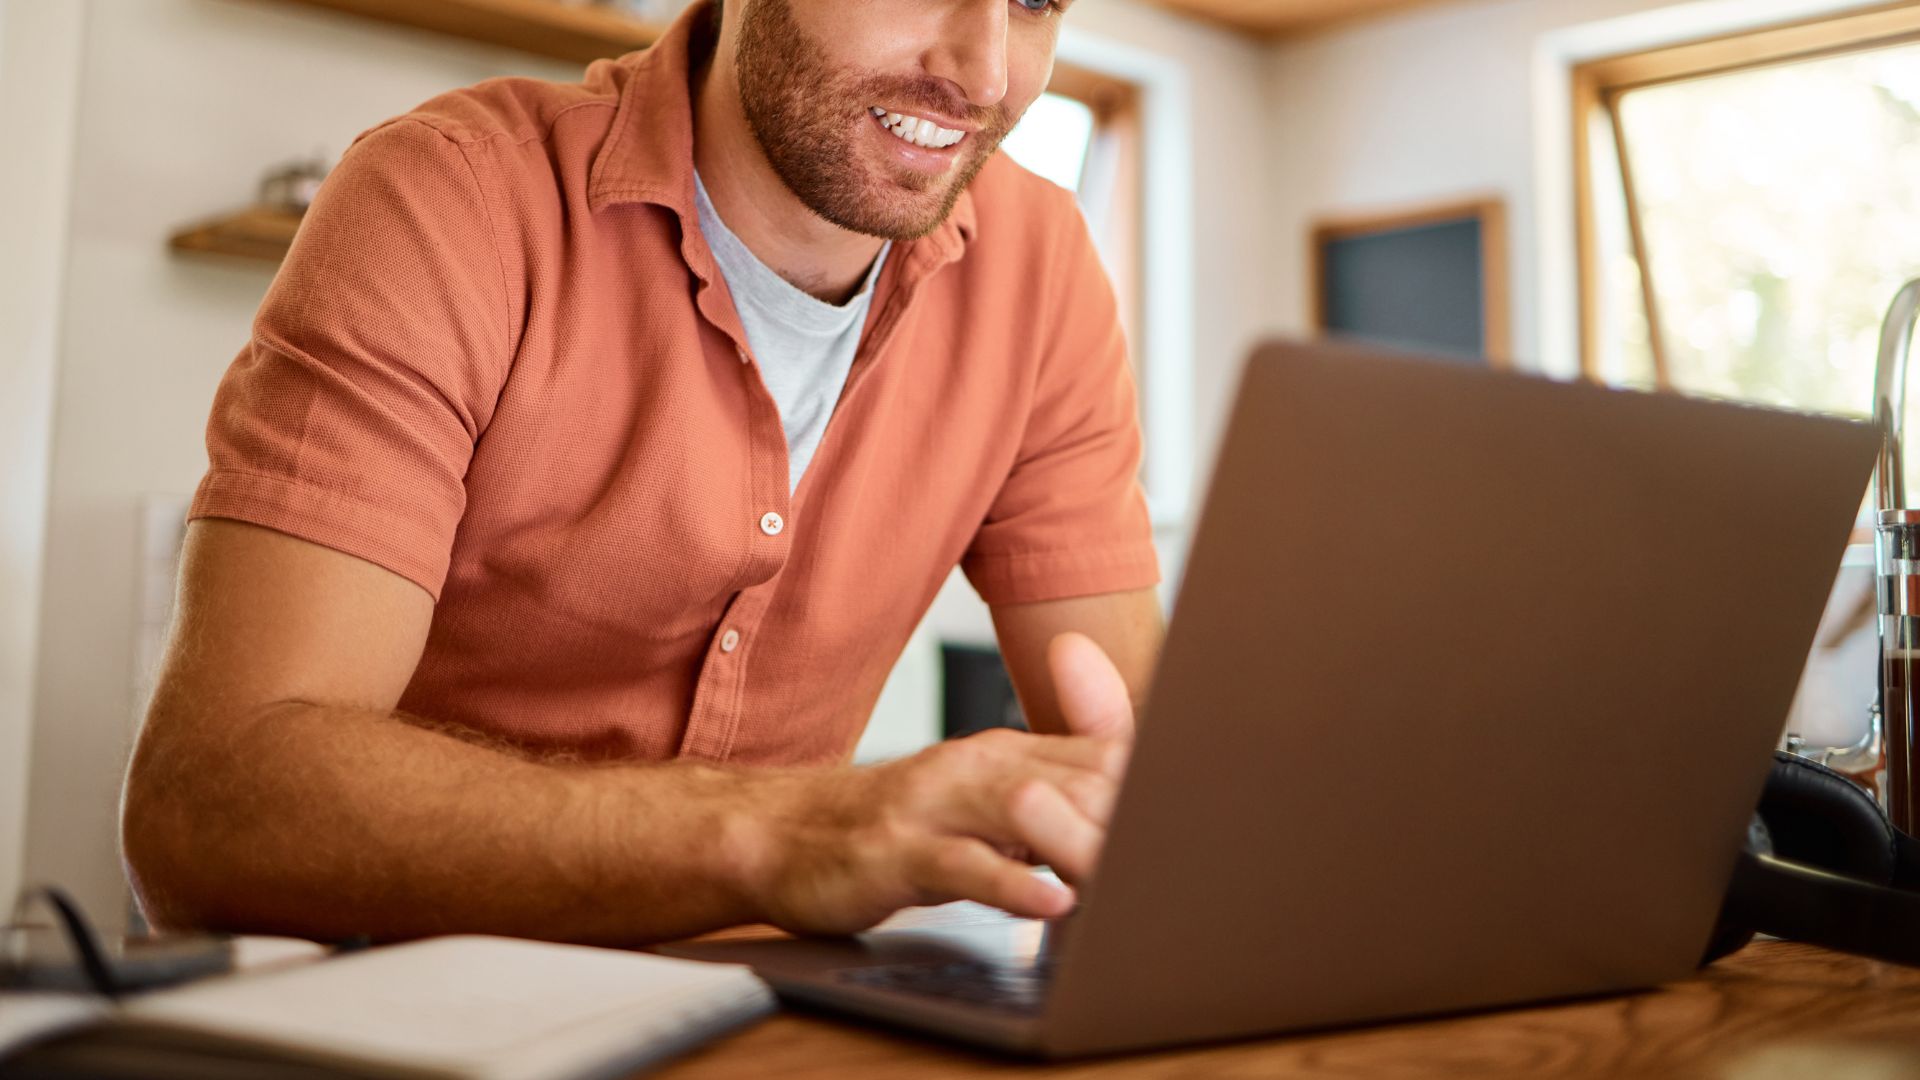 Image of a man looking at his laptop, smiling at a desk